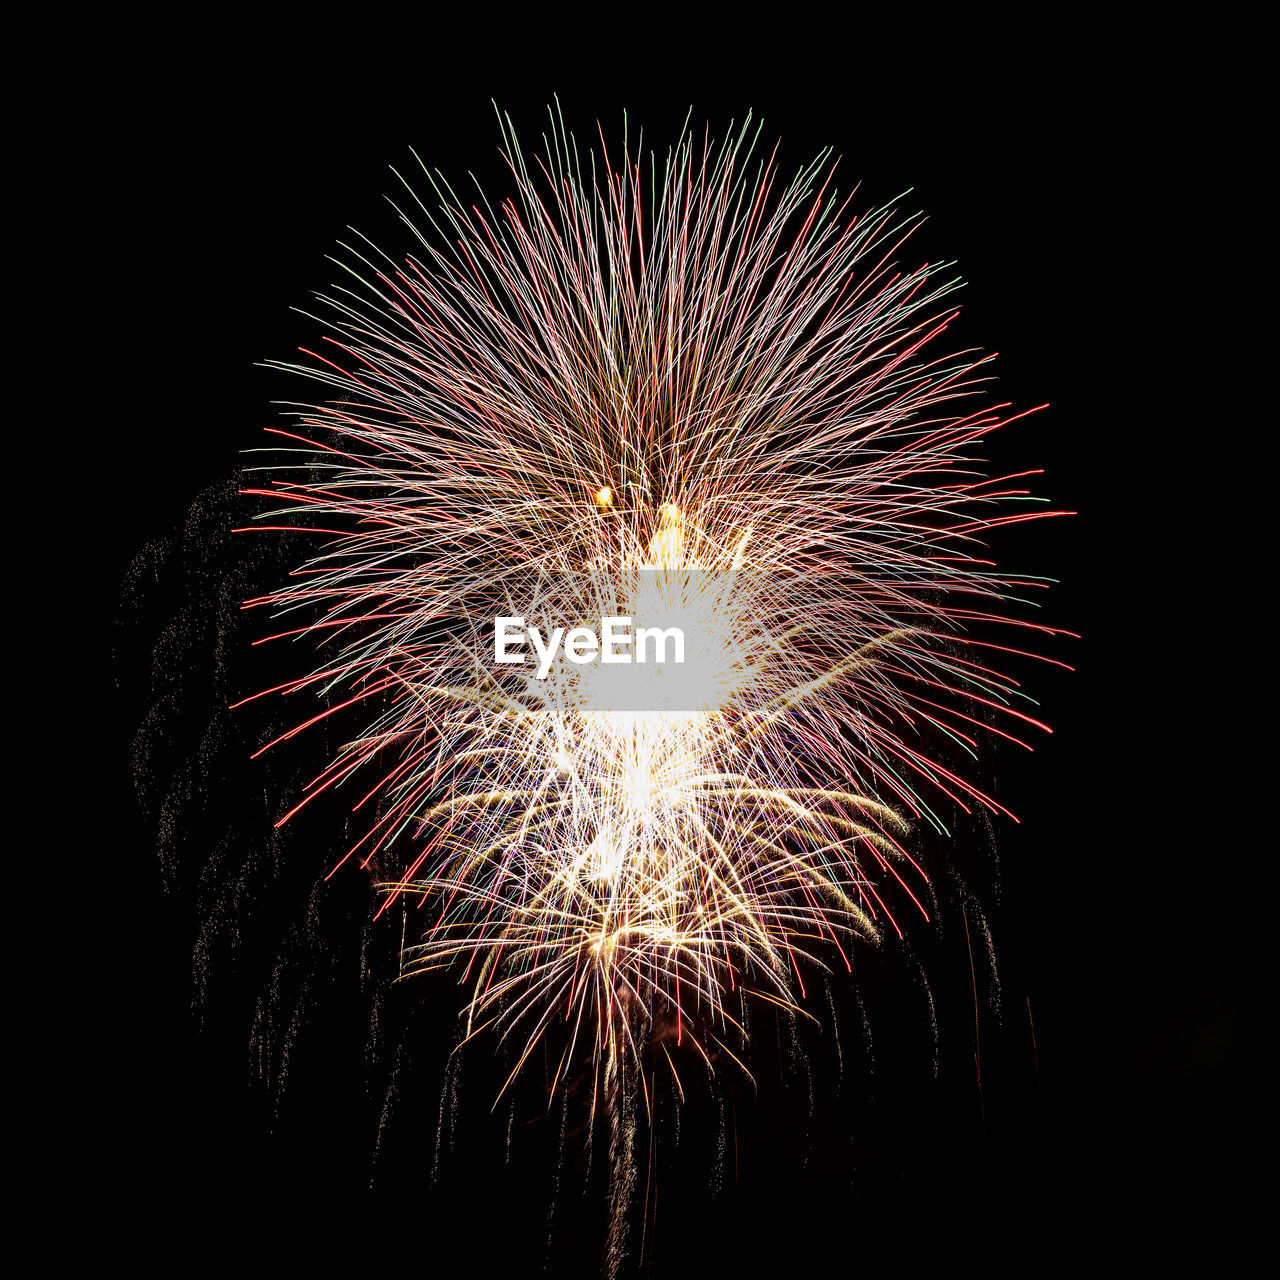 fireworks, celebration, motion, night, event, illuminated, firework display, arts culture and entertainment, exploding, glowing, no people, sky, nature, long exposure, low angle view, firework - man made object, blurred motion, burning, recreation, multi colored, outdoors, dark